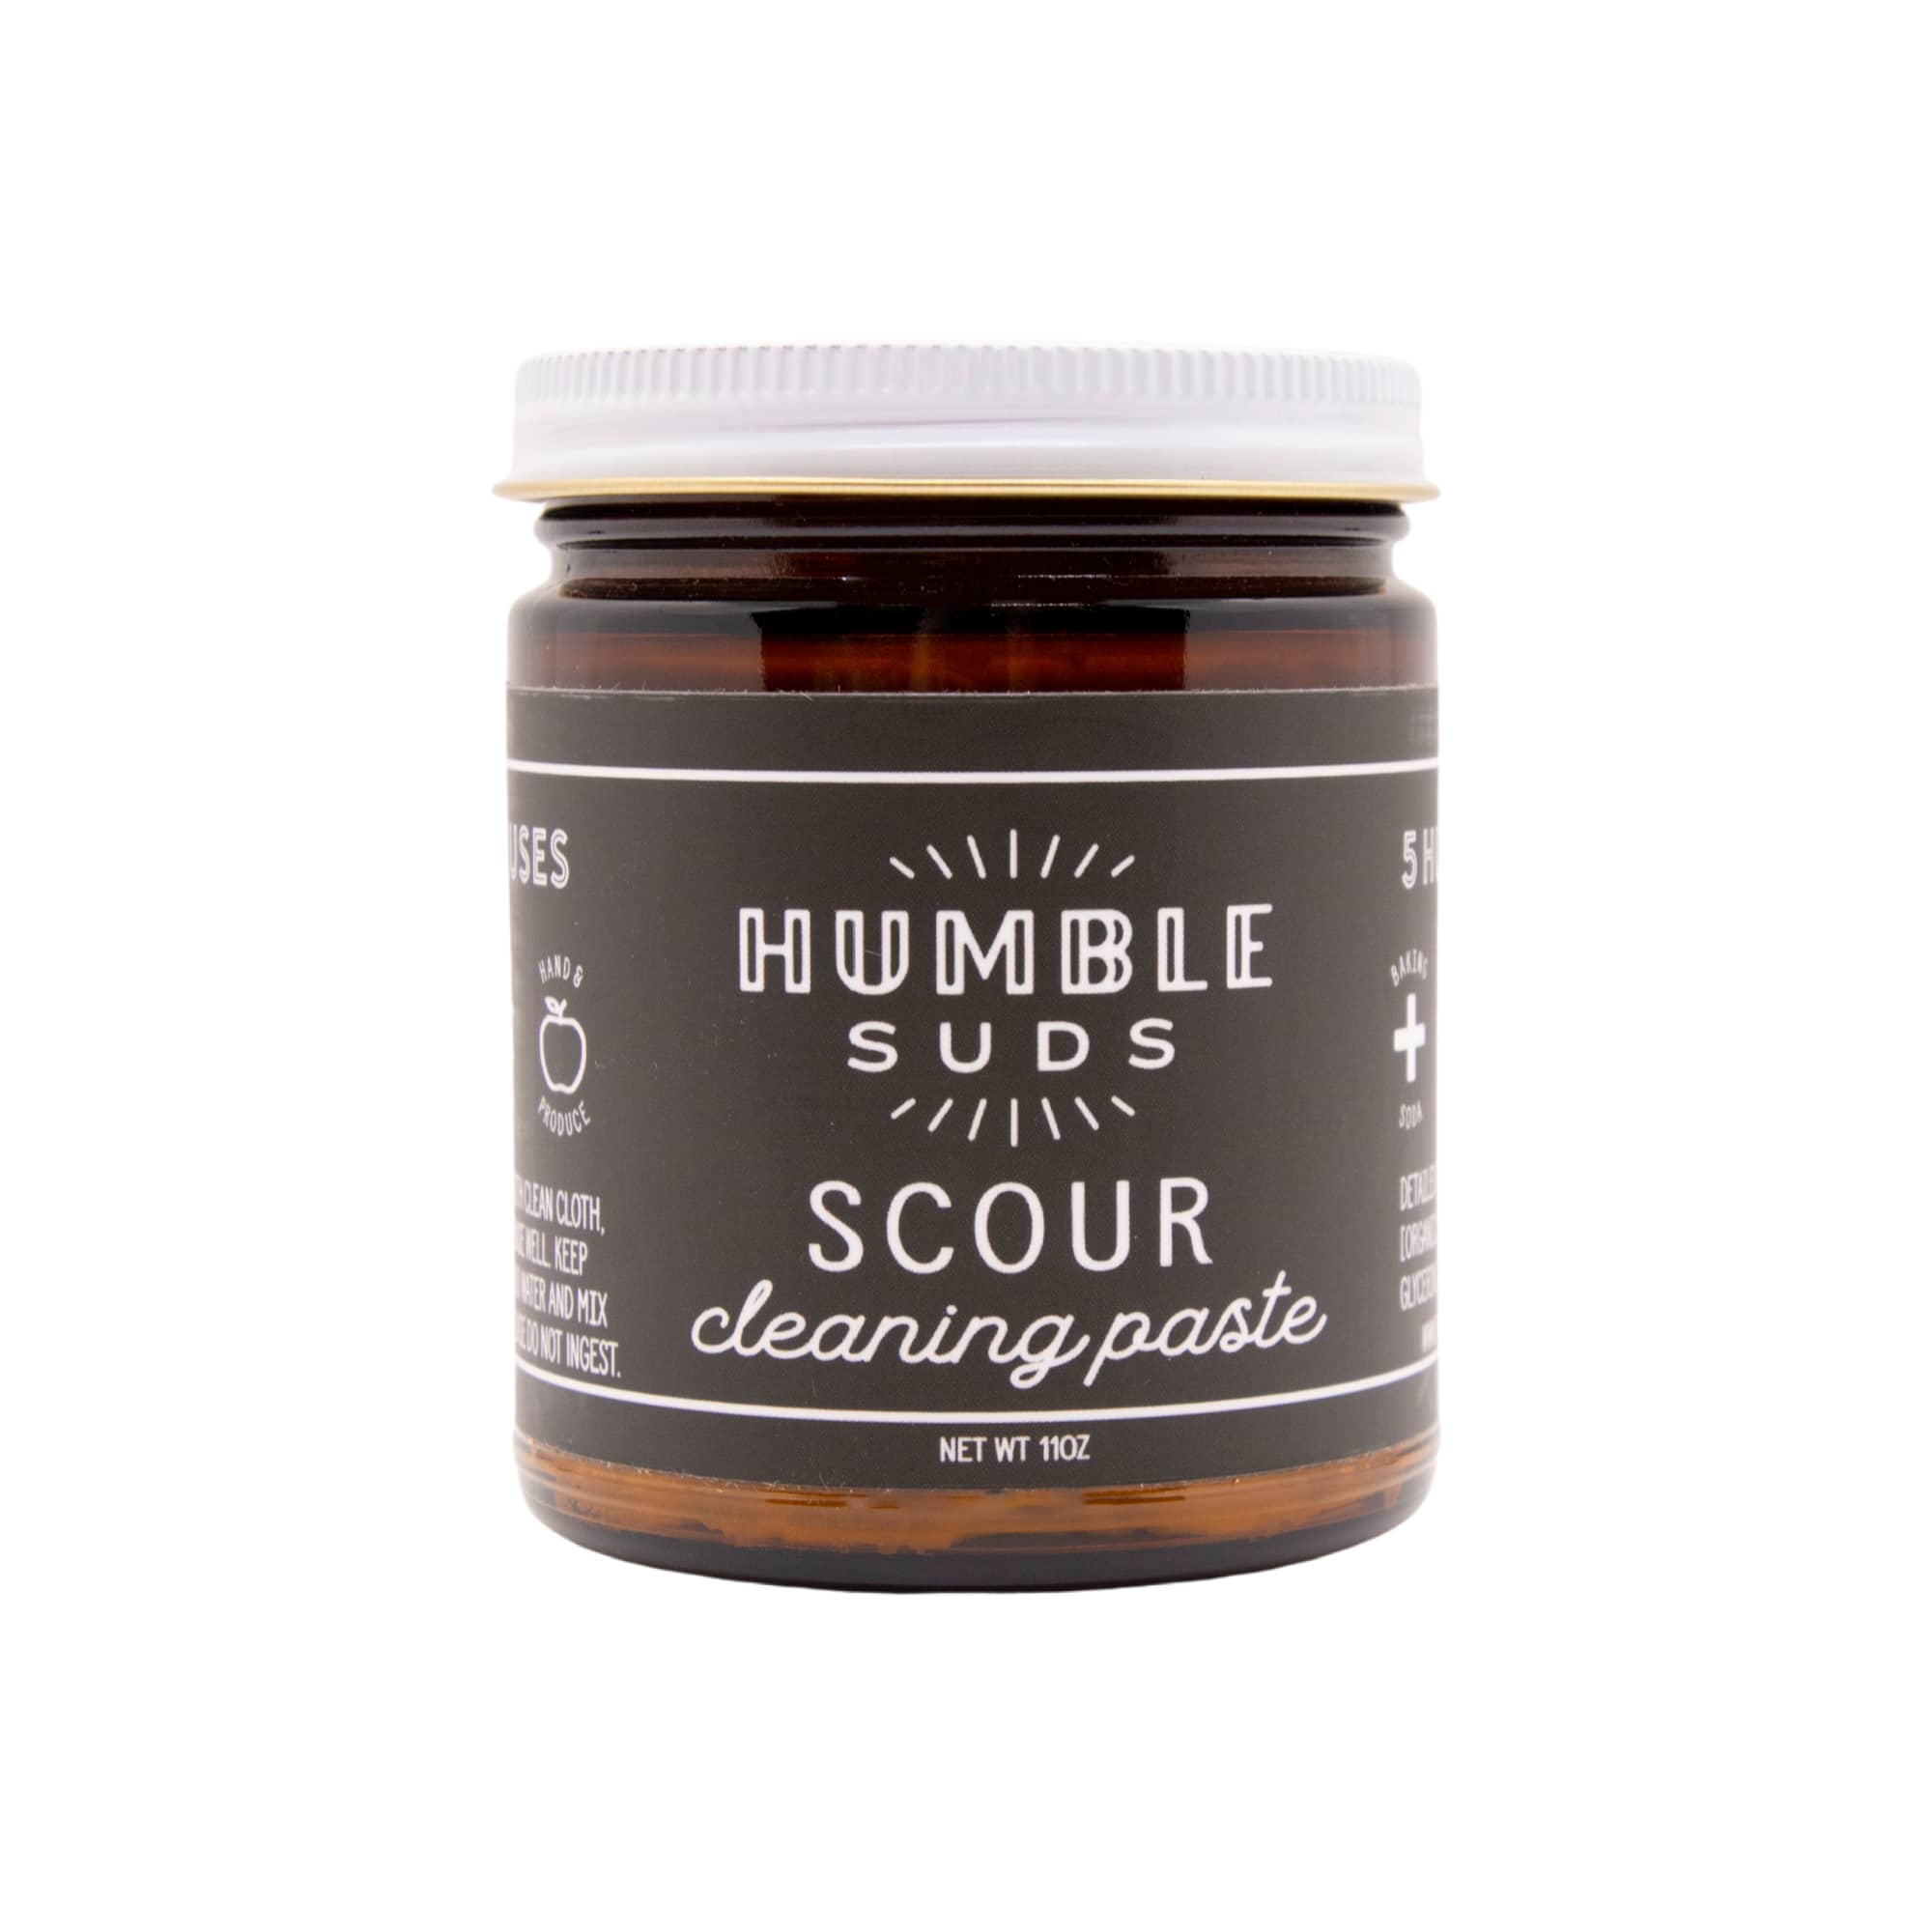 Humble Suds scour cleaning paste